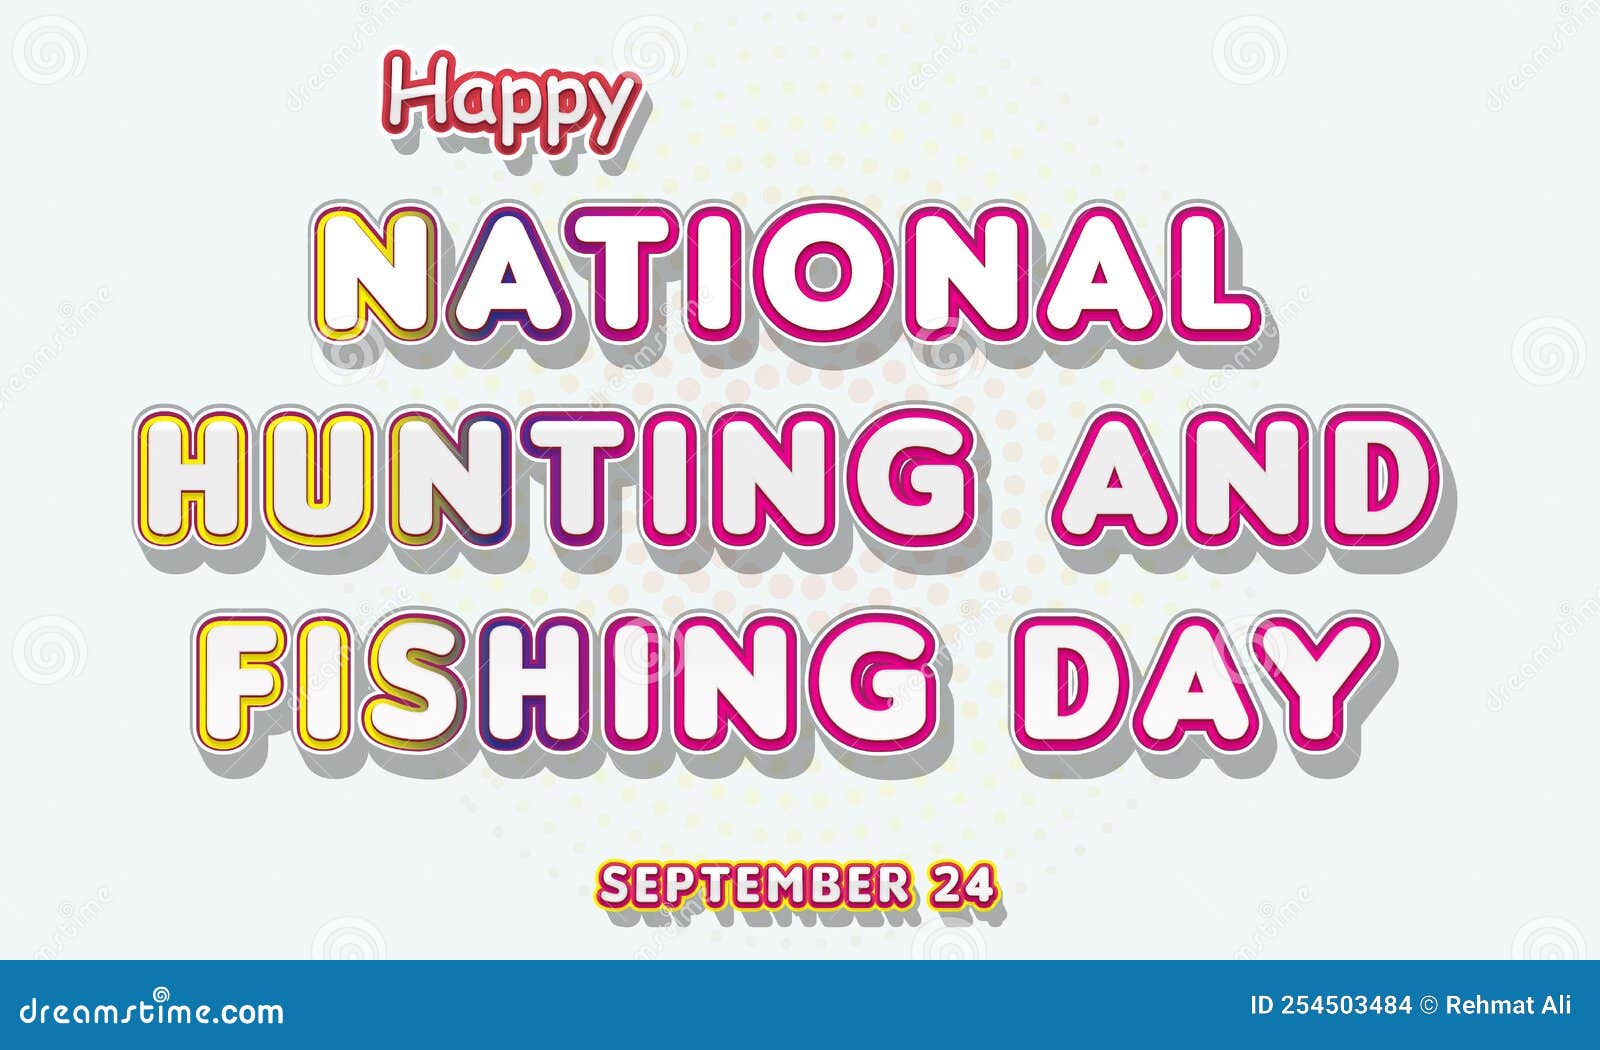 Happy National Hunting and Fishing Day, September 24. Calendar of